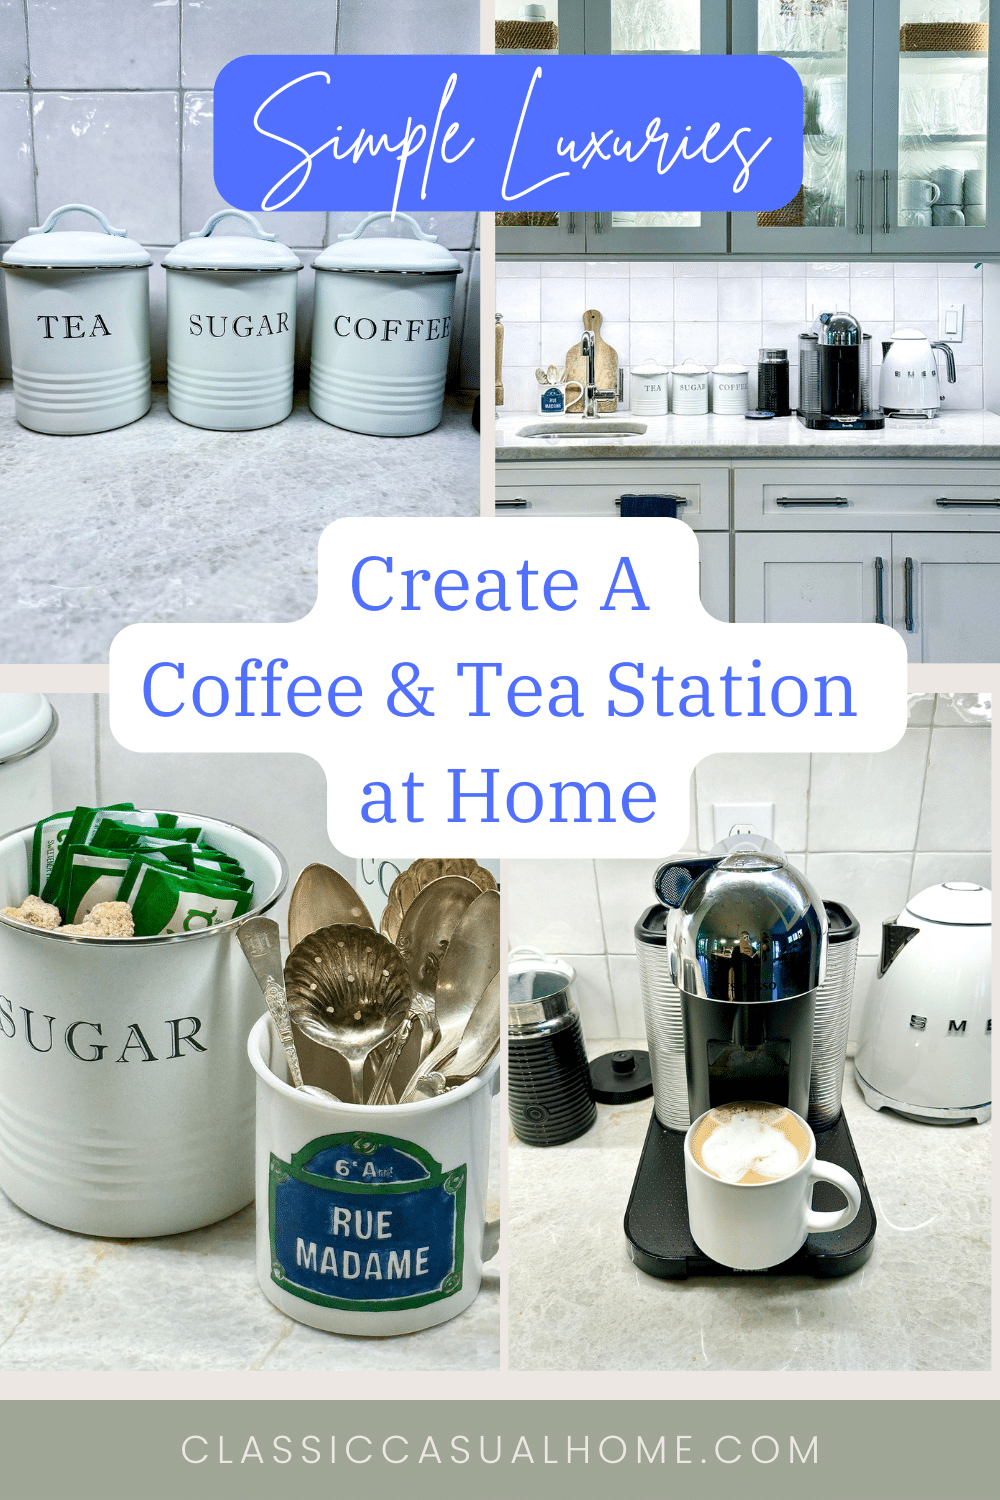 To to create a coffee and tea station